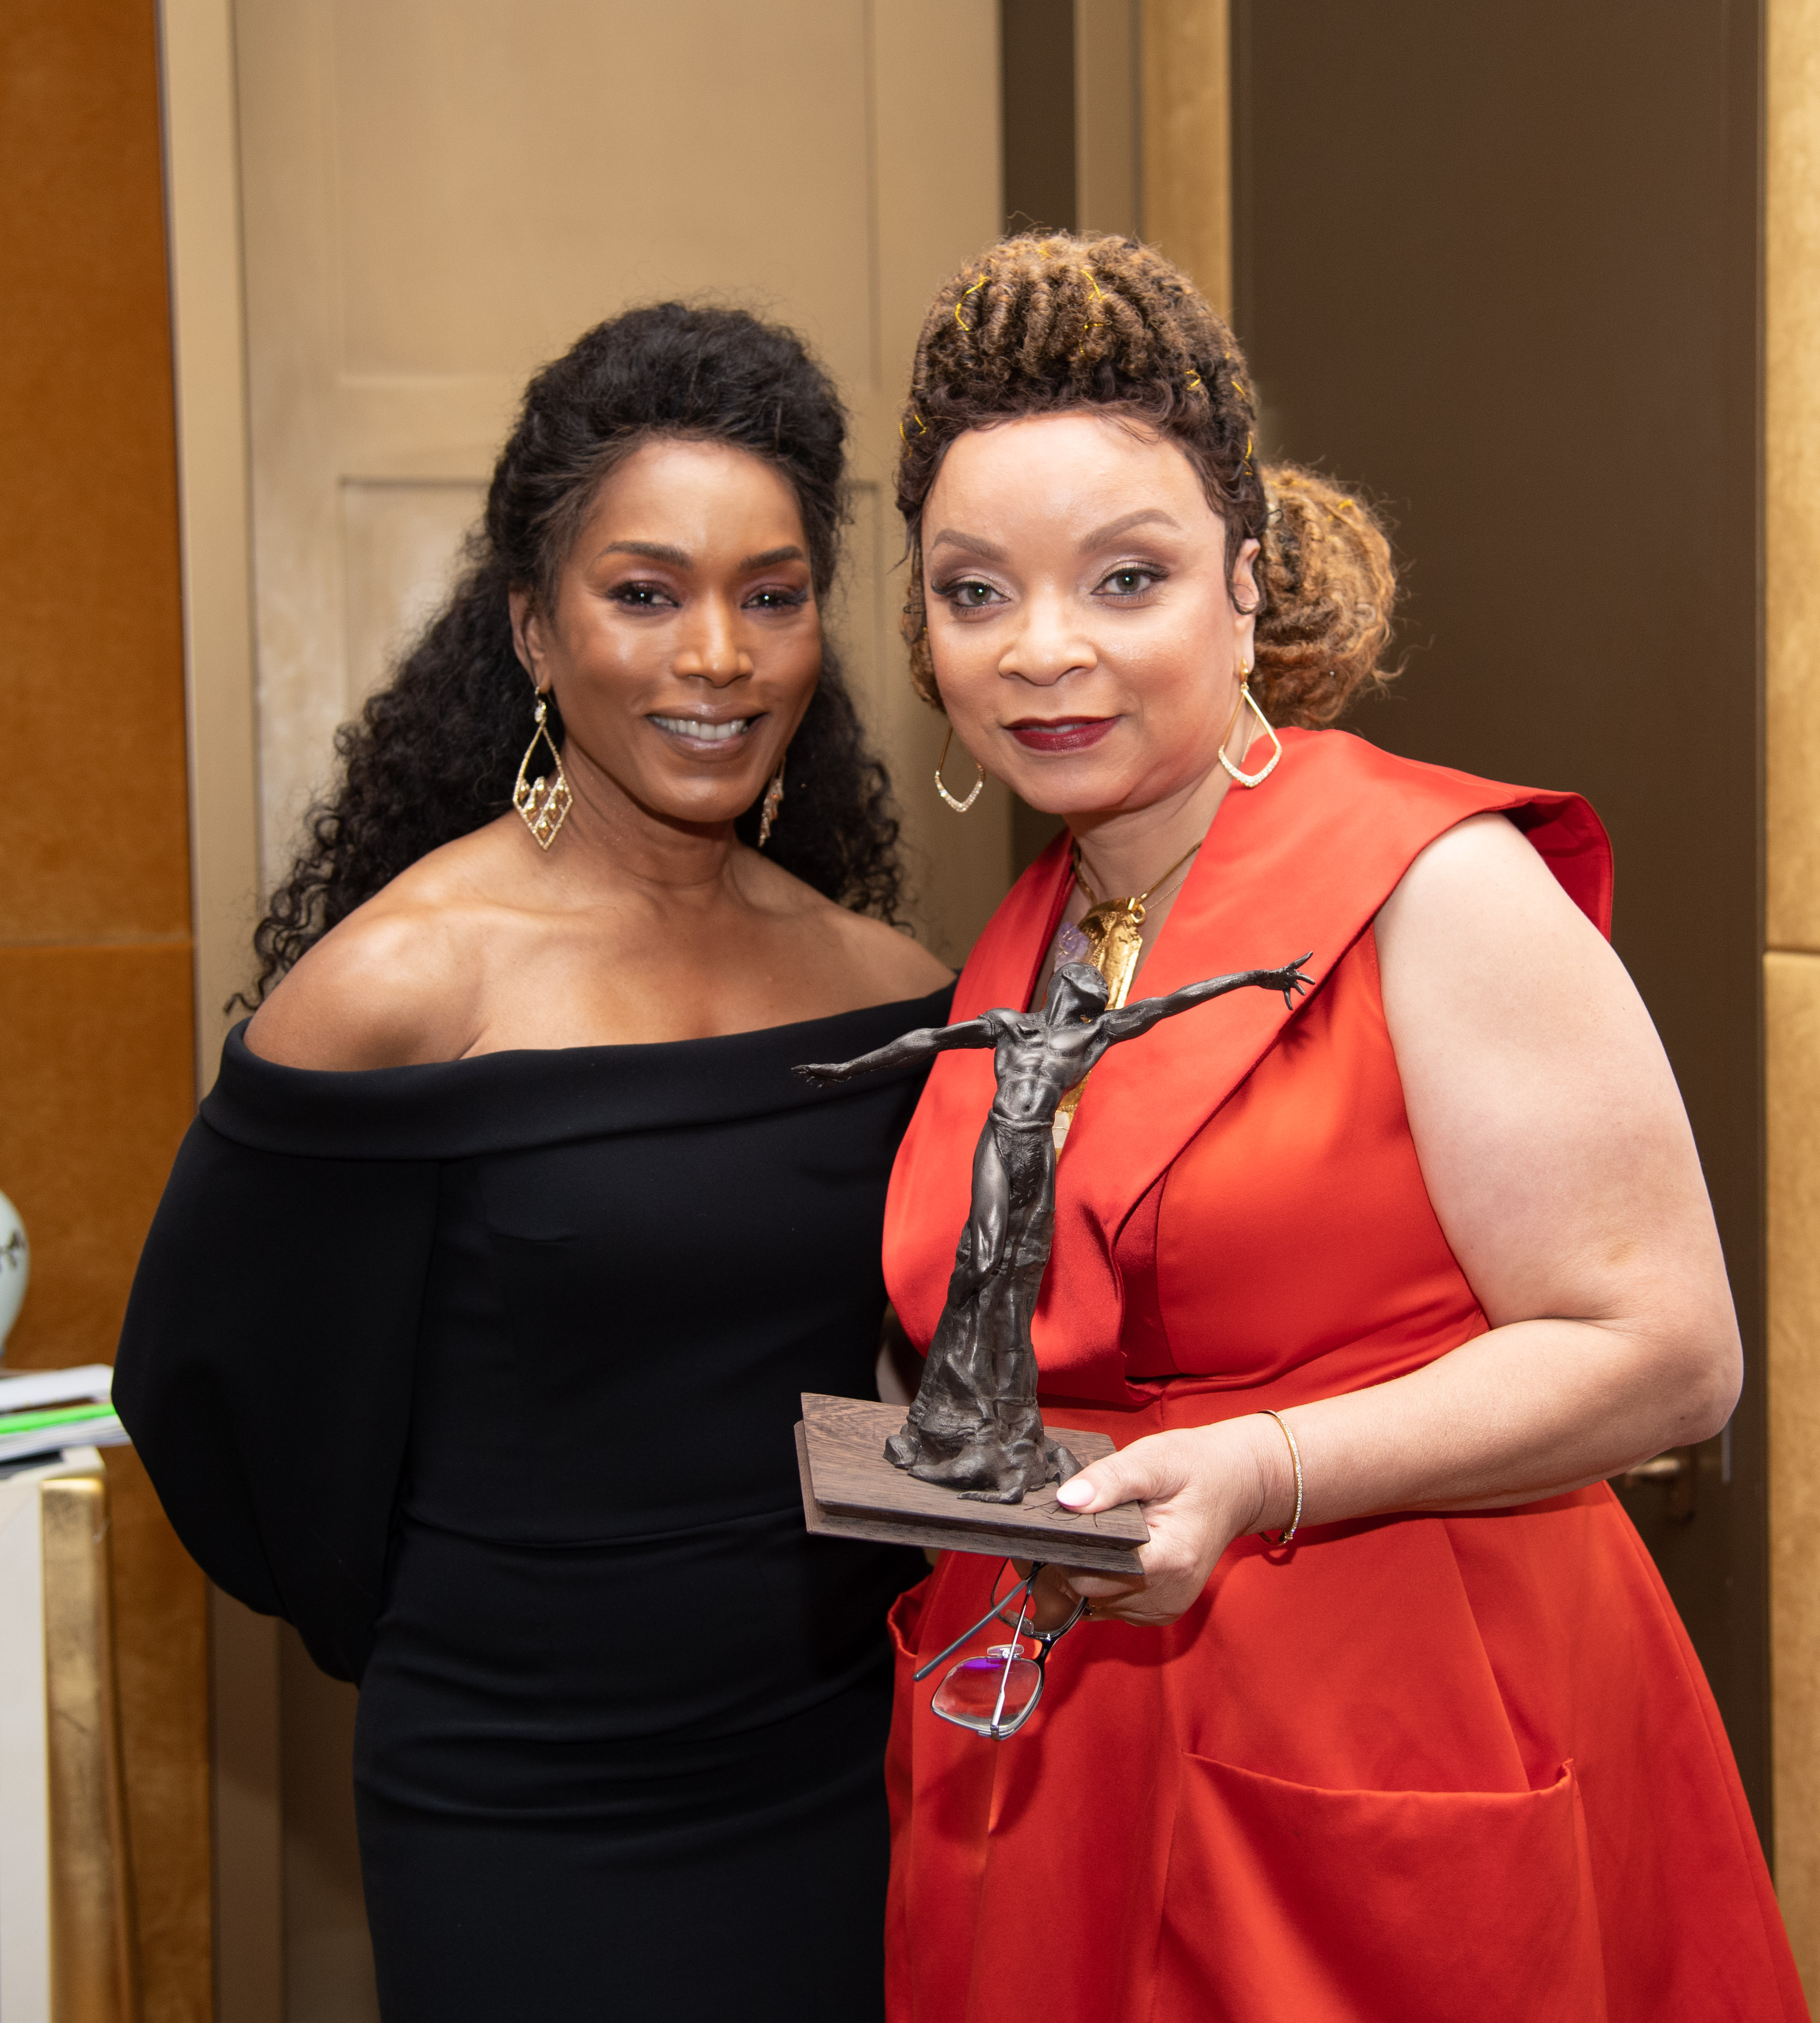 Actor Angela Bassett with Ruth E. Carter, holding the award statuette designed by Guest